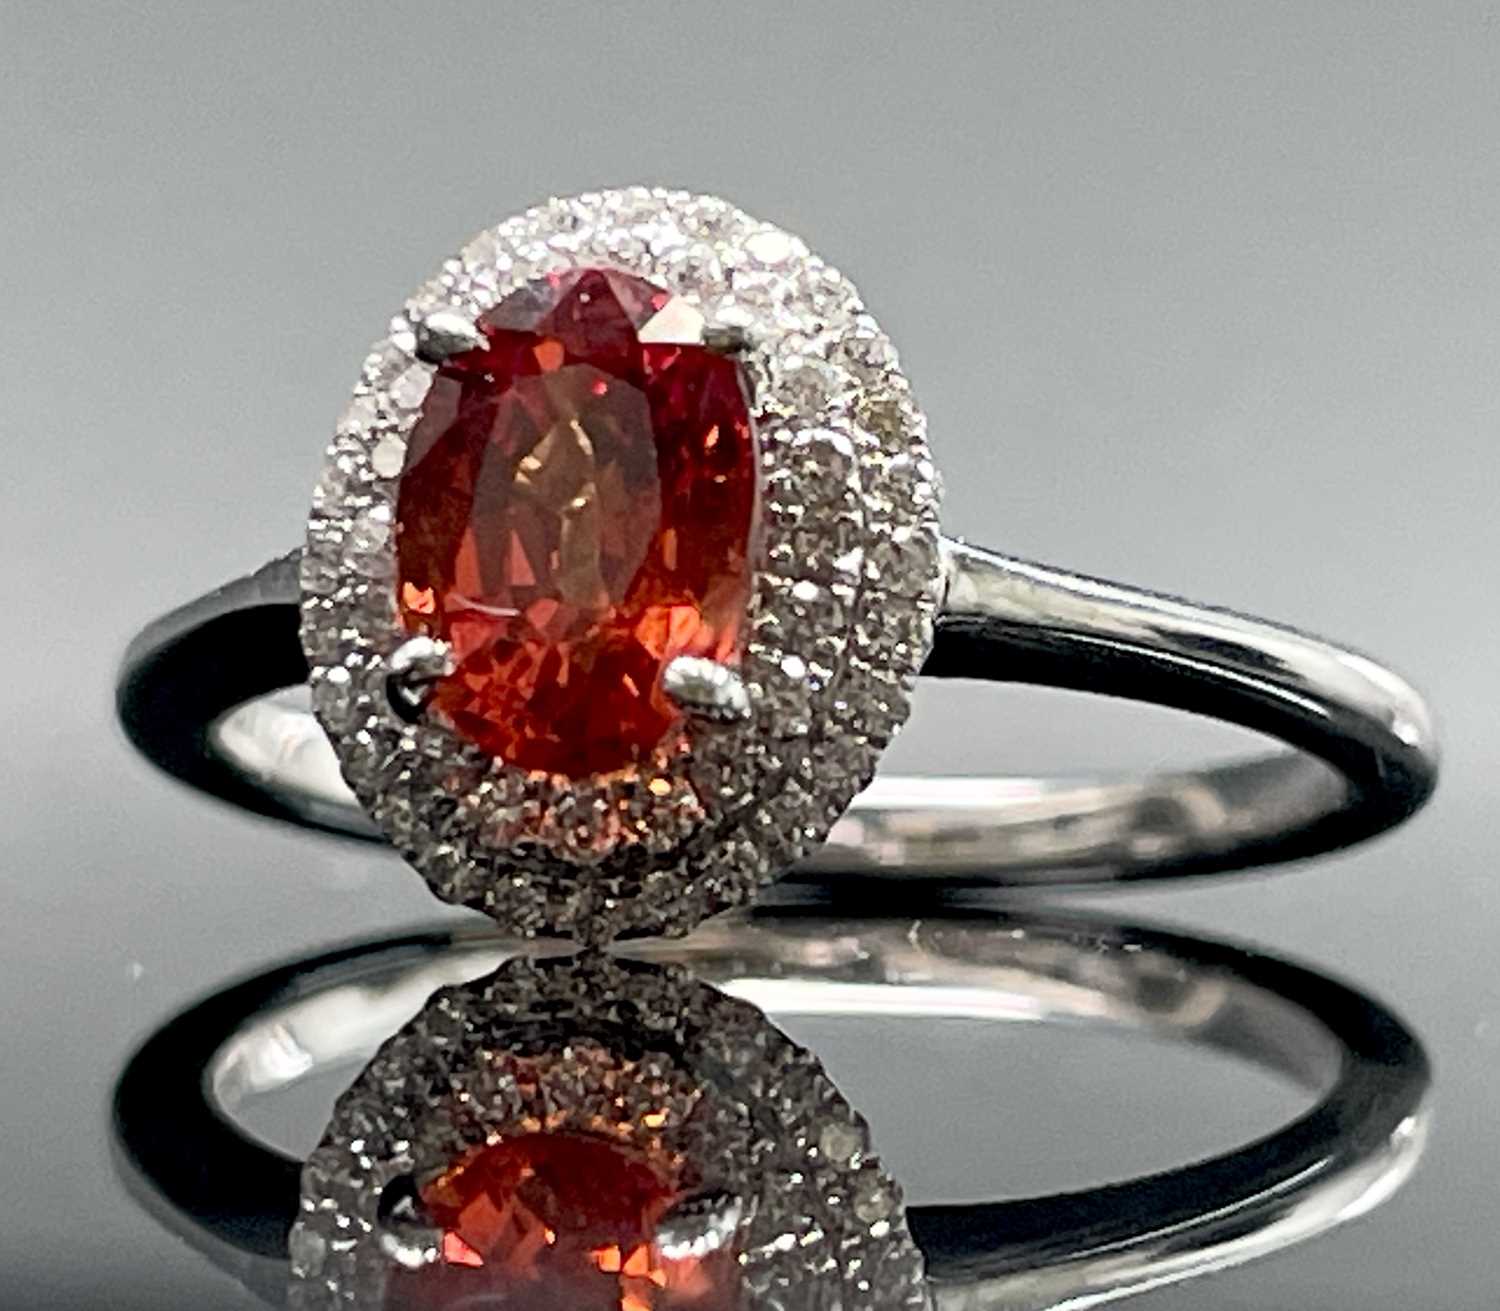 A very rare Iliana golden and orange oval sapphire of approximately 1.5 ct set in an 18ct white gold